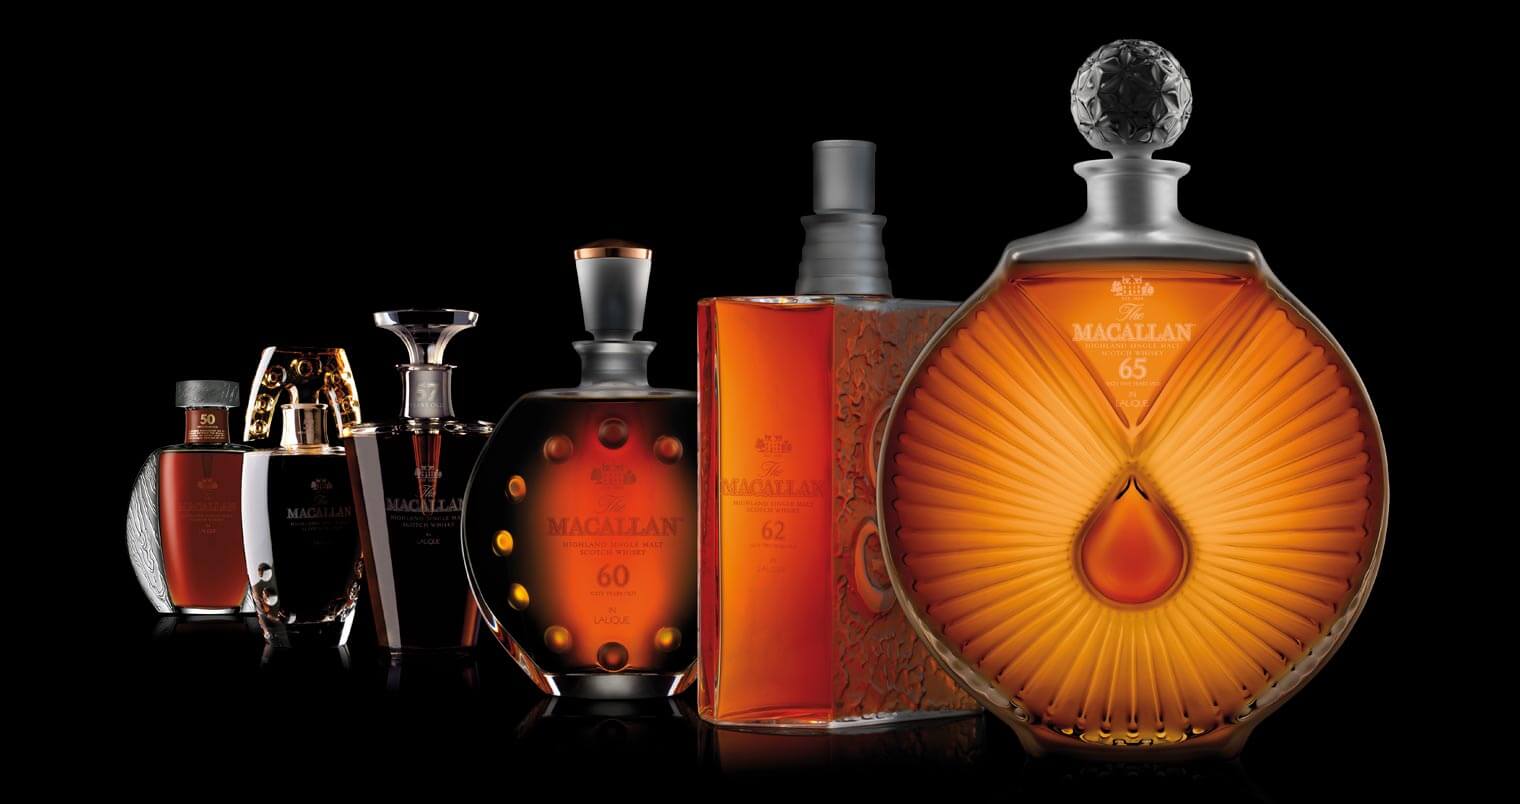 The Macallan in Lalique Six Pillars Collection to be Auctioned, featured image